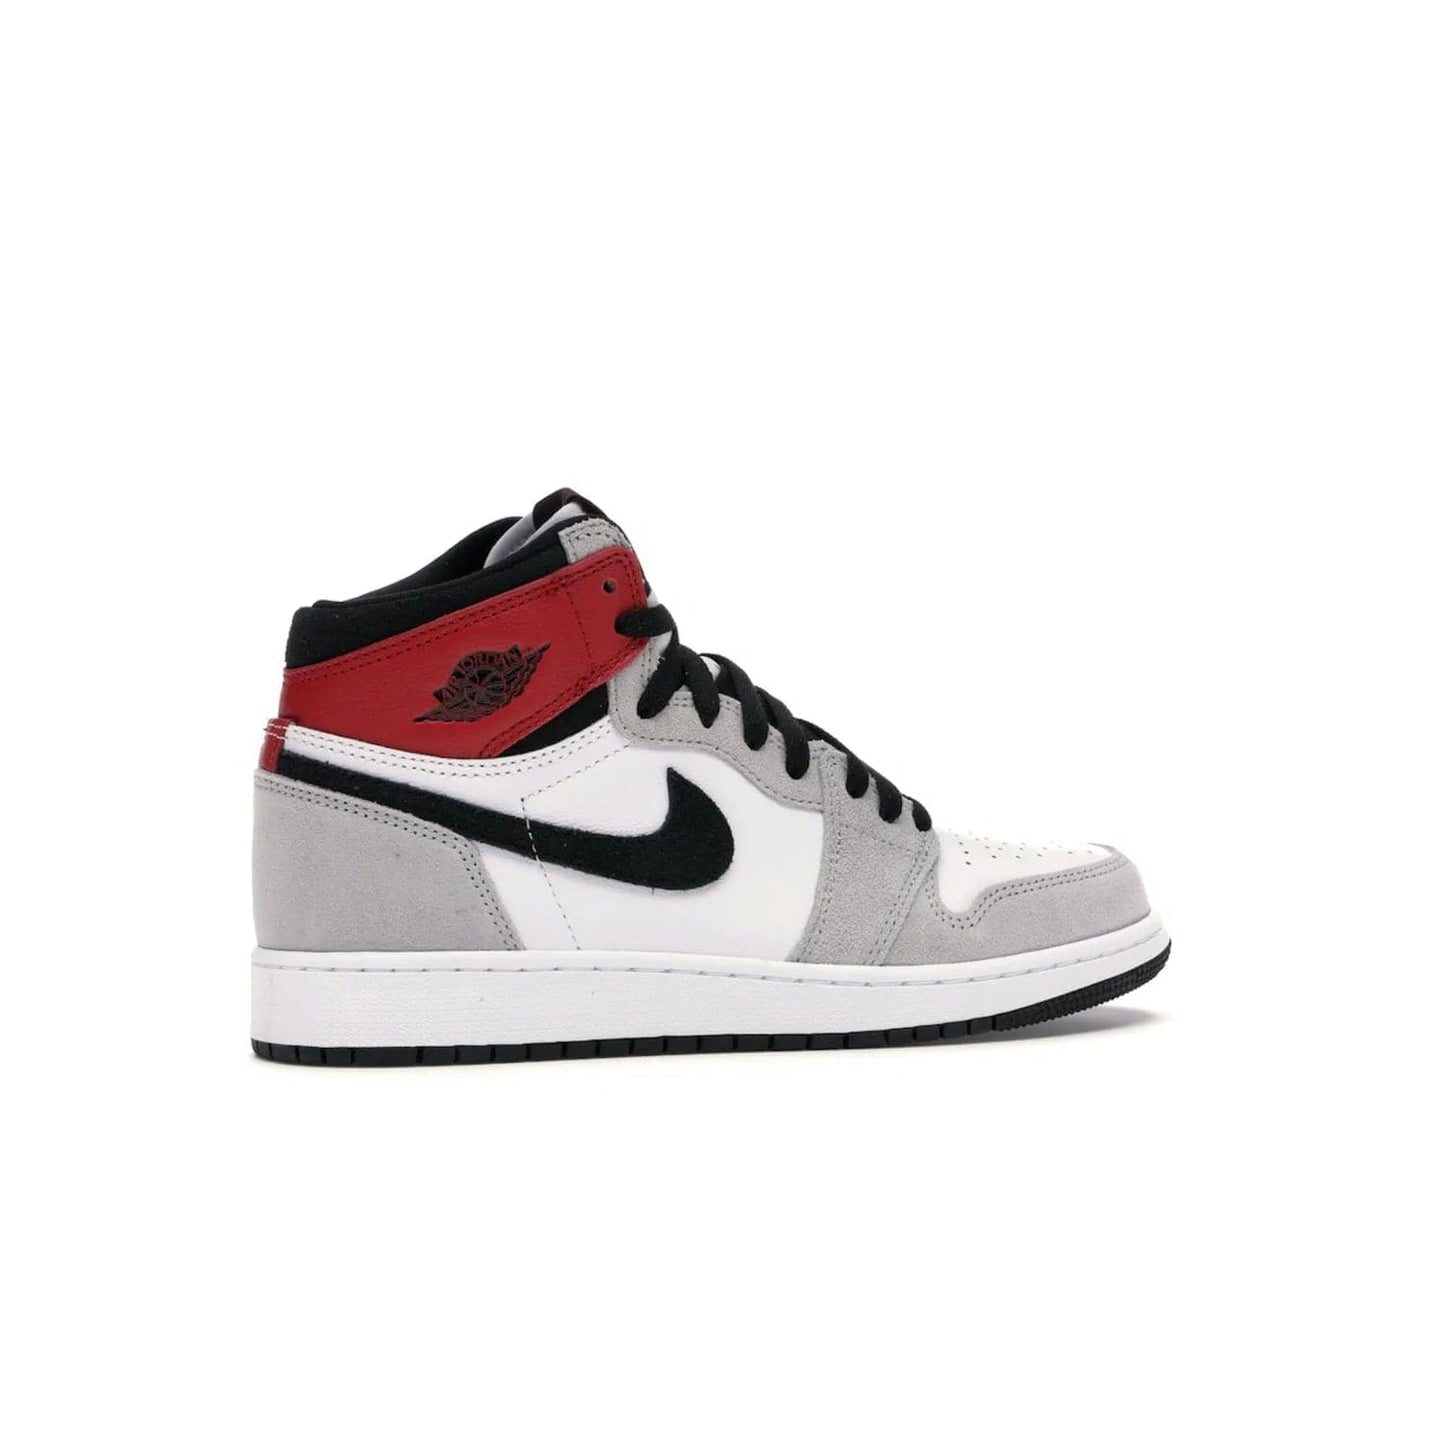 Jordan 1 Retro High Light Smoke Grey (GS) - Image 35 - Only at www.BallersClubKickz.com - Jordan 1 Retro High Light Smoke Grey (GS) features shades of grey, black, and Varsity Red with a bold silhouette. Premium white leather and suede overlays create a unique look. Released July 2020, offering style and performance. Perfect sneaker for any collector or fan.